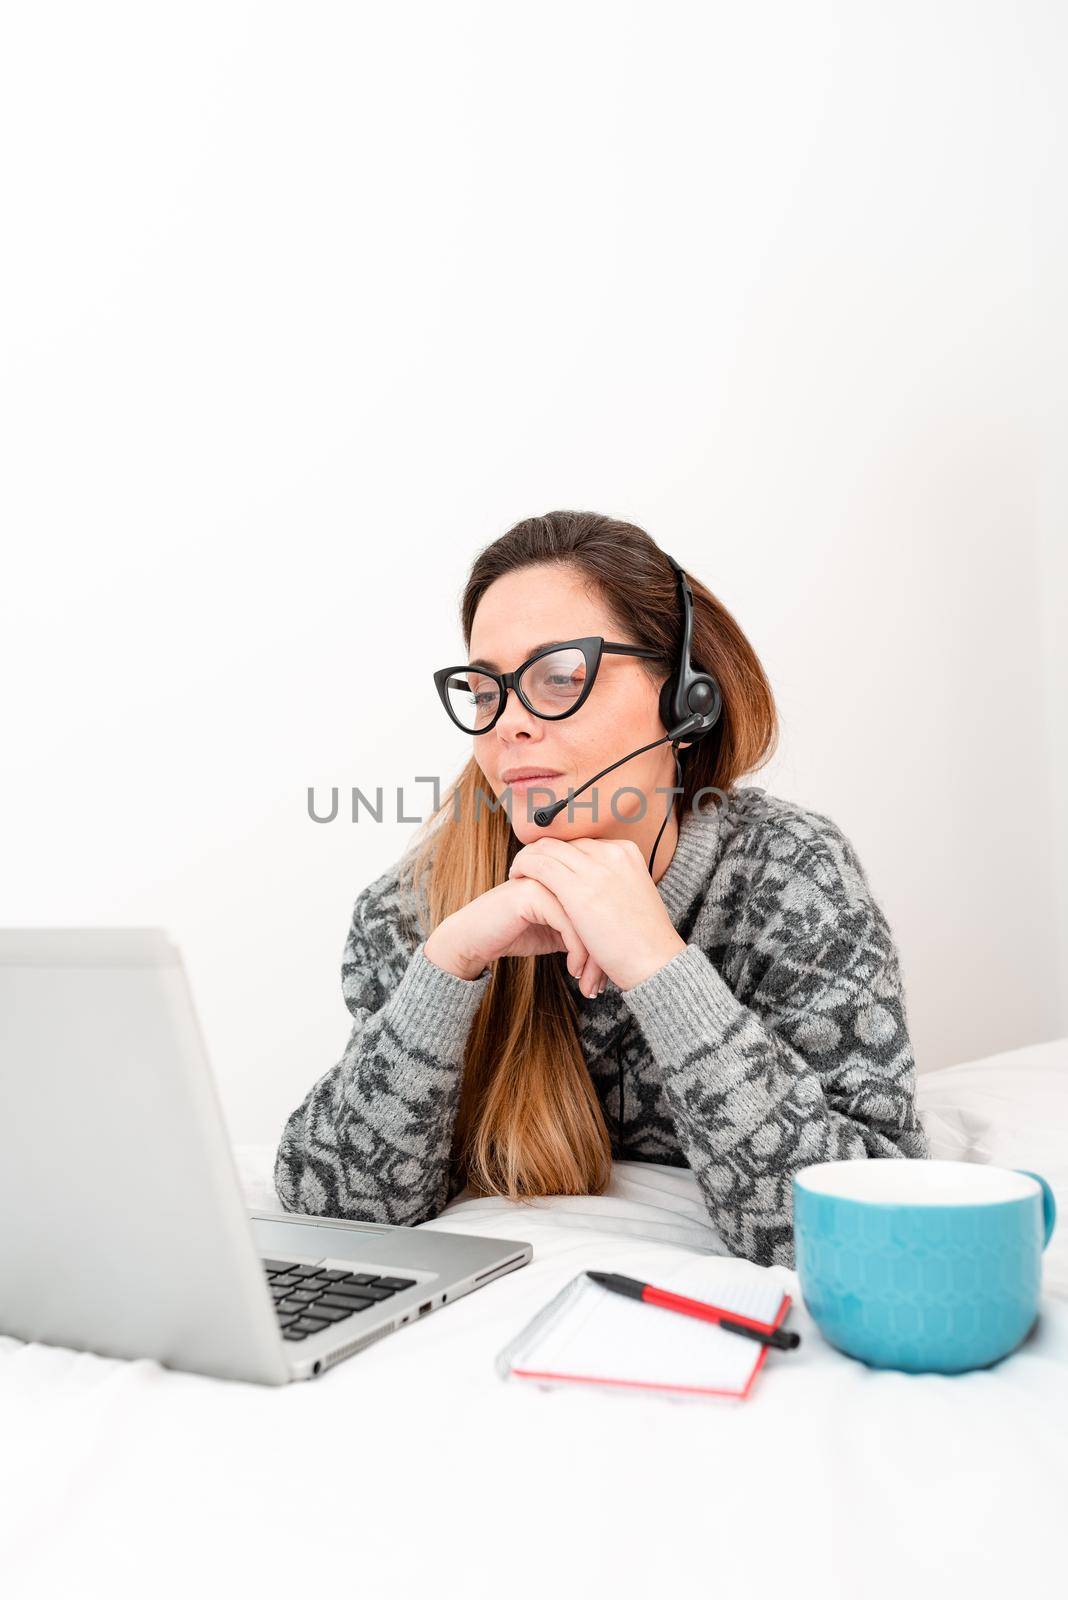 Callcenter Agent Working Home, Student Preparing Examinations, Reading Blog Content, Watching Internet Interesting Videos, Podcast Listening, Learning New Things by nialowwa